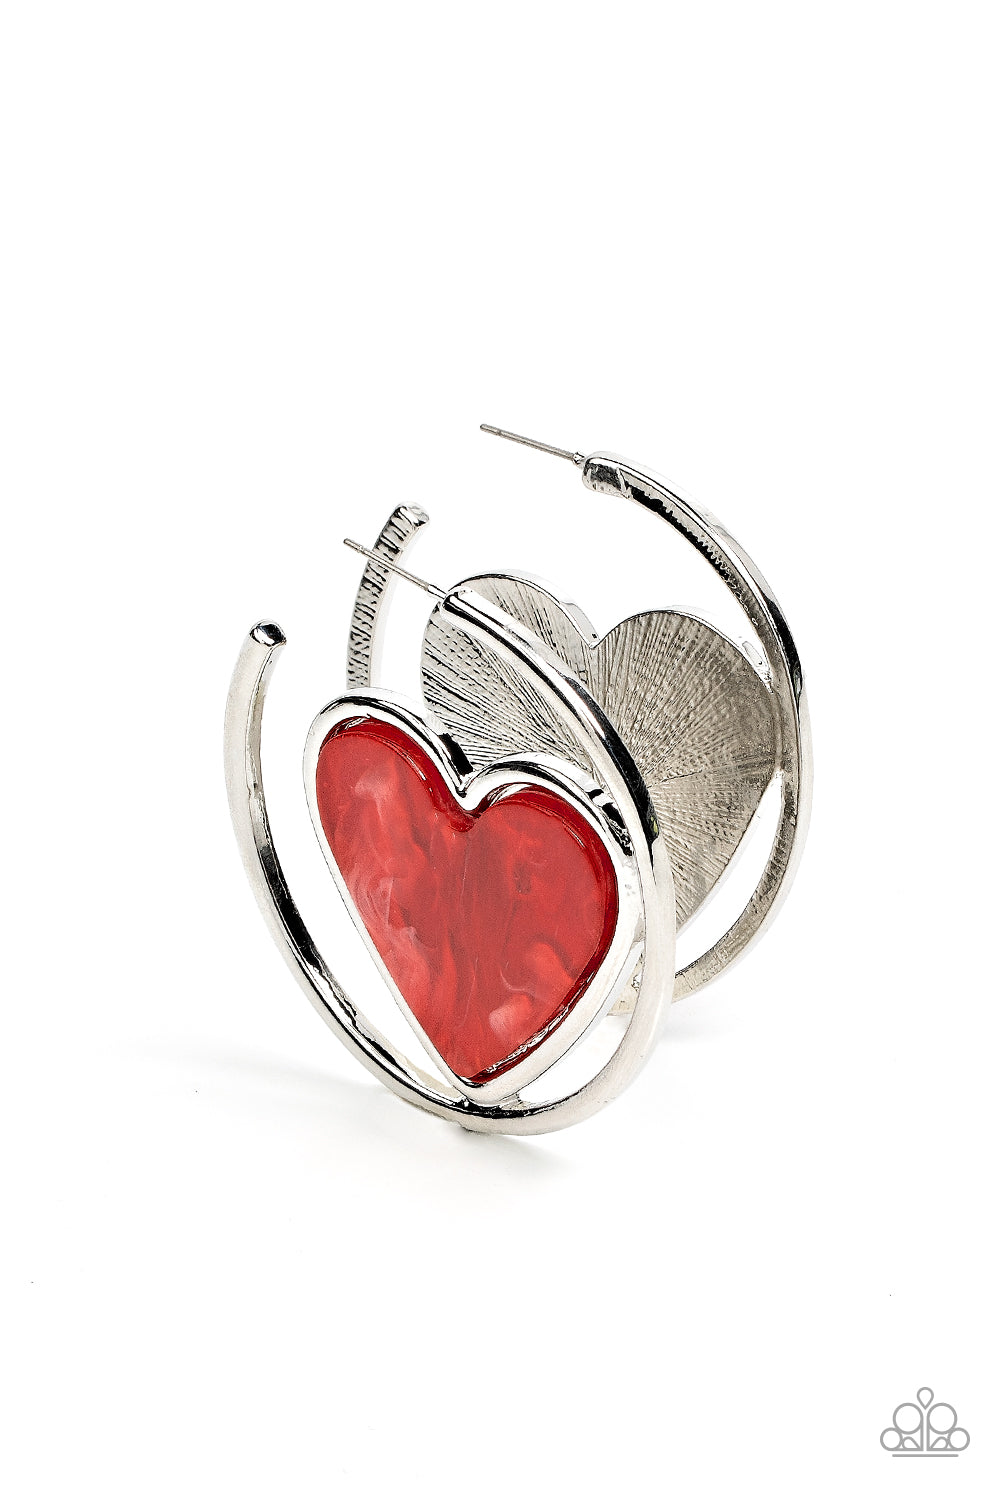 Paparazzi Accessories Smitten with You - Red Featuring a faux marble finish, a fiery red heart nestles inside of an asymmetrical silver hoop for a flirtatious pop of color. Earring attaches to a standard post fitting. Hoop measures approximately 2" in dia